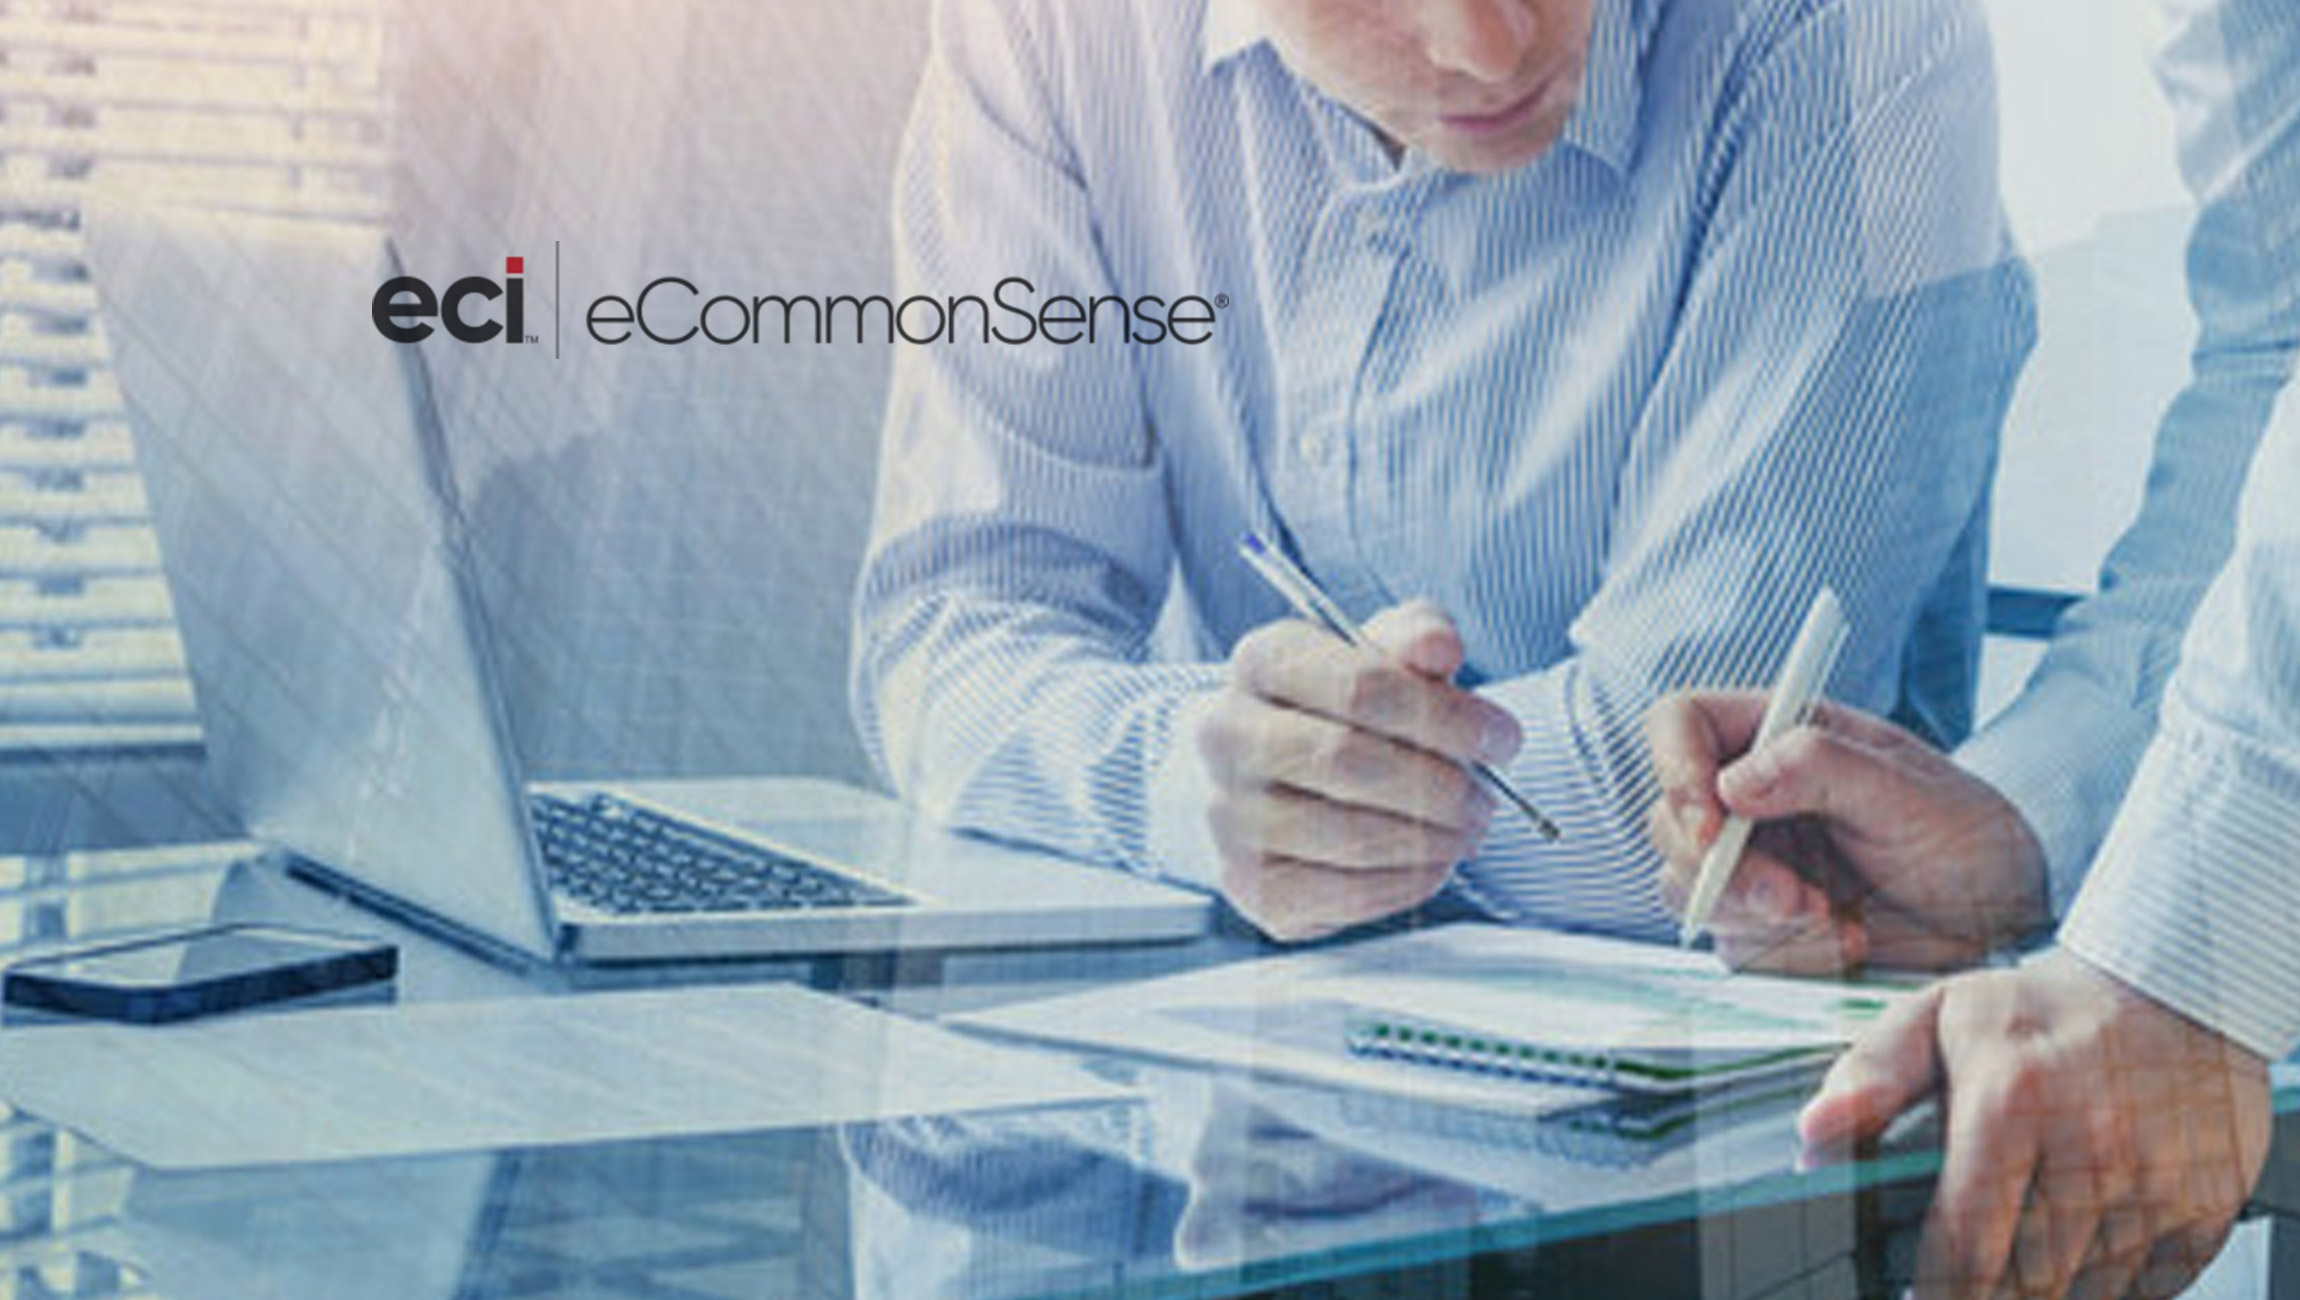 ECI-Launches-eCommonSense-in-North-America-to-Help-LBM-Businesses-Create-the-Digital-Experiences-Expected-by-Customers